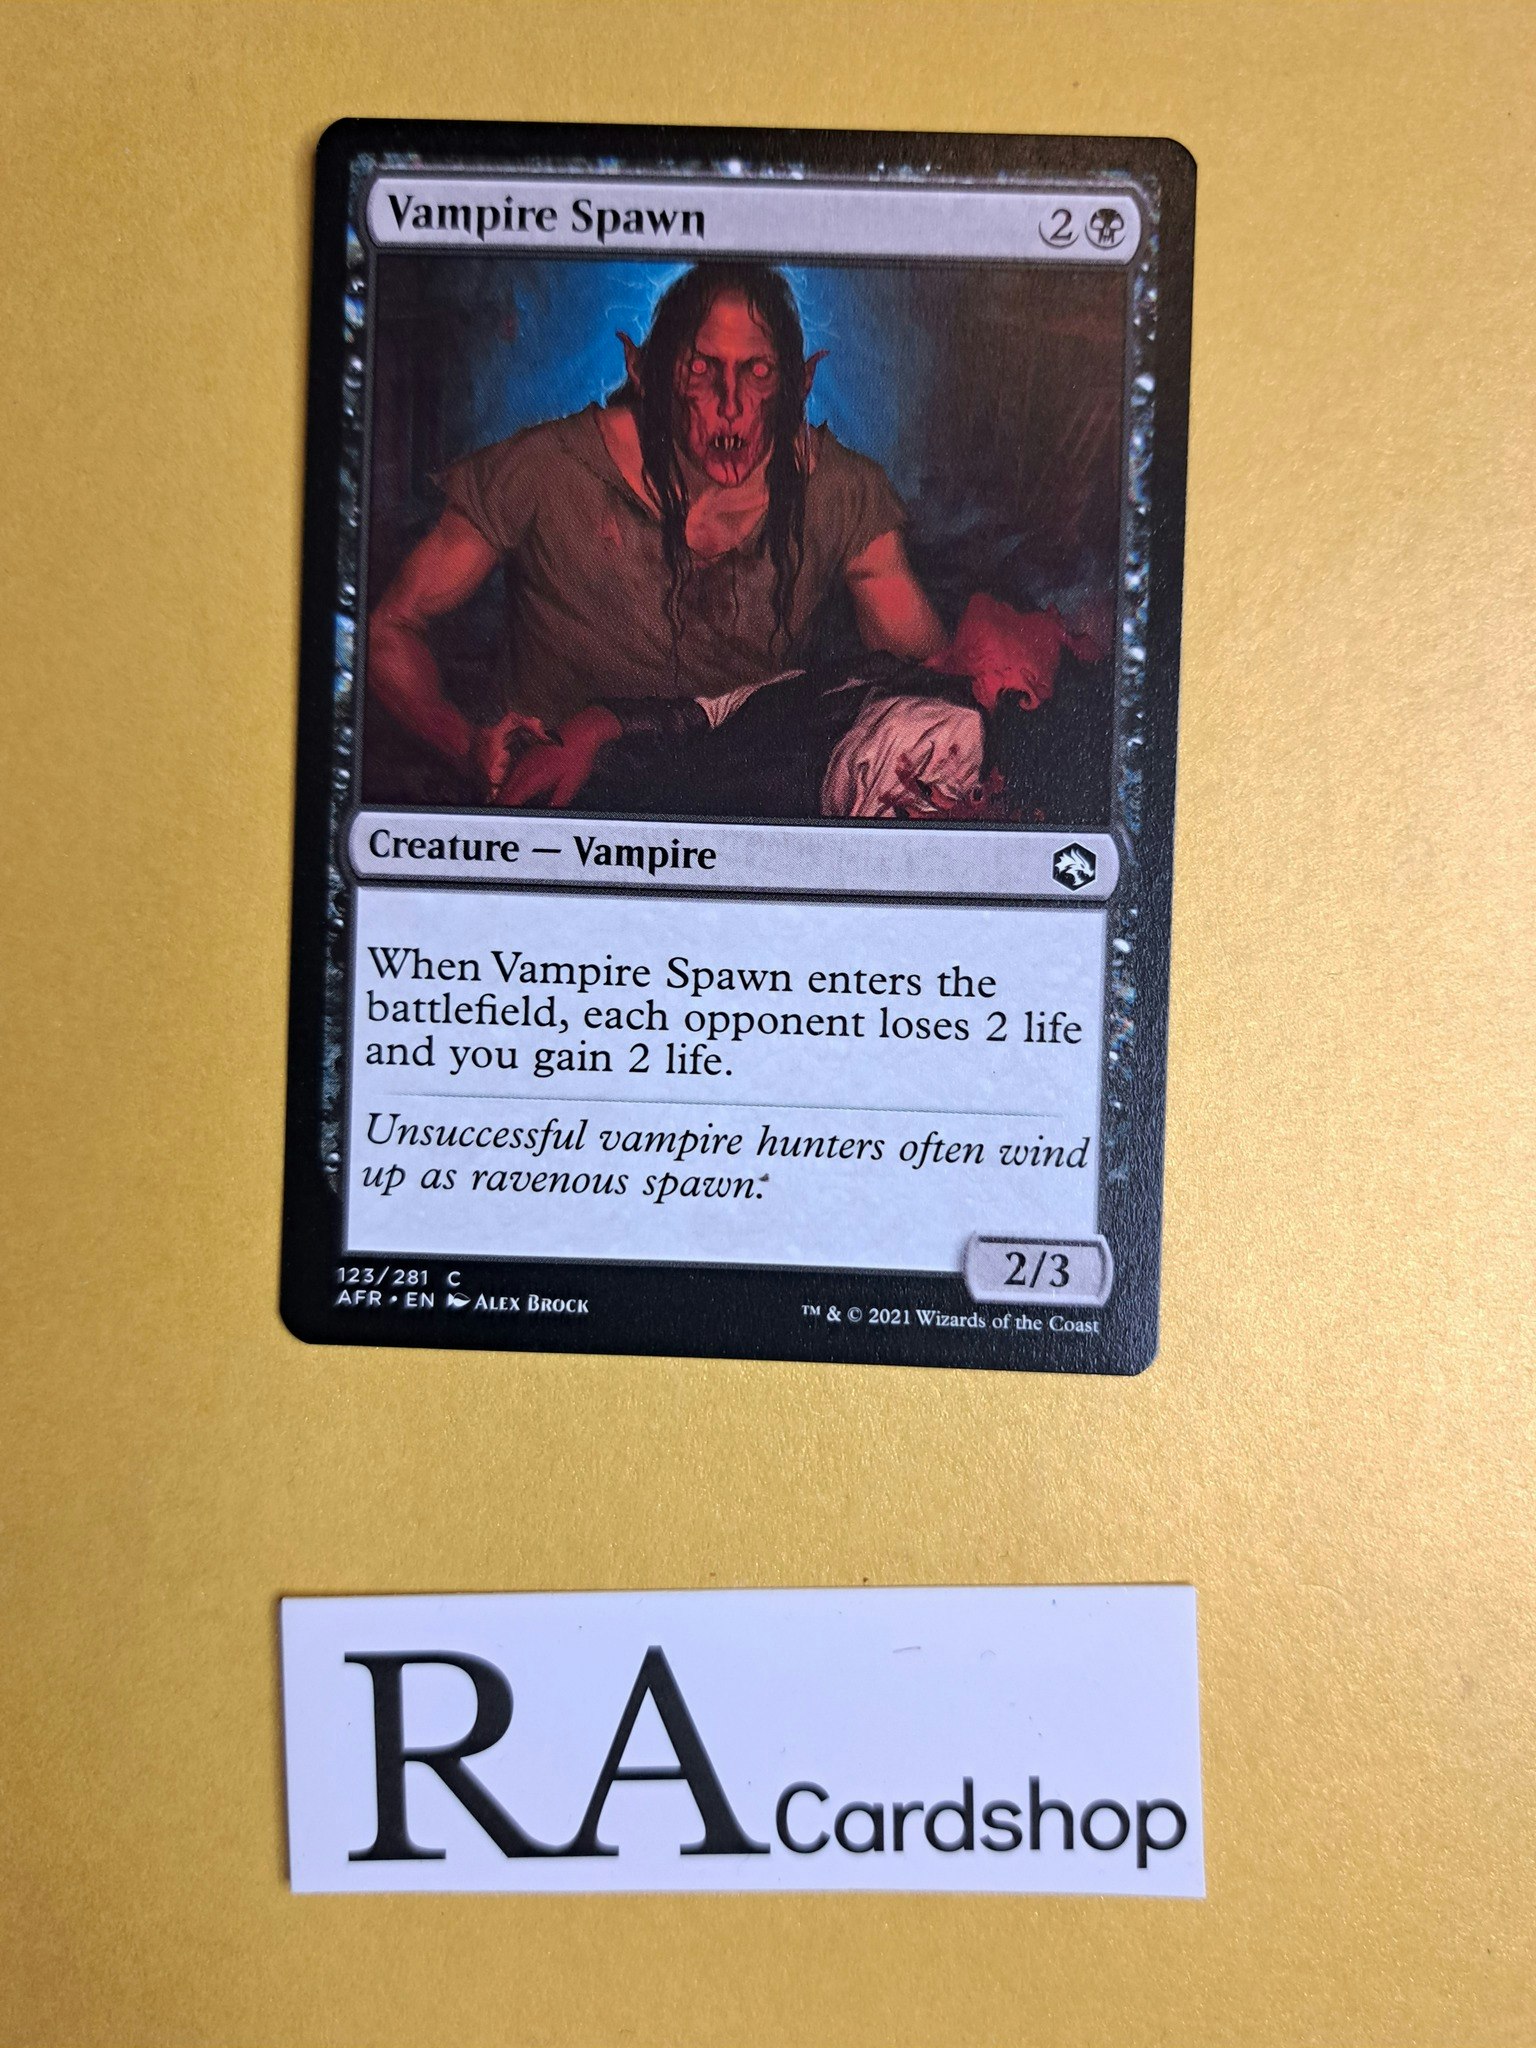 Vampire Spawn Common 123/281 Adventures in the Forgotten Realms Magic the Gathering